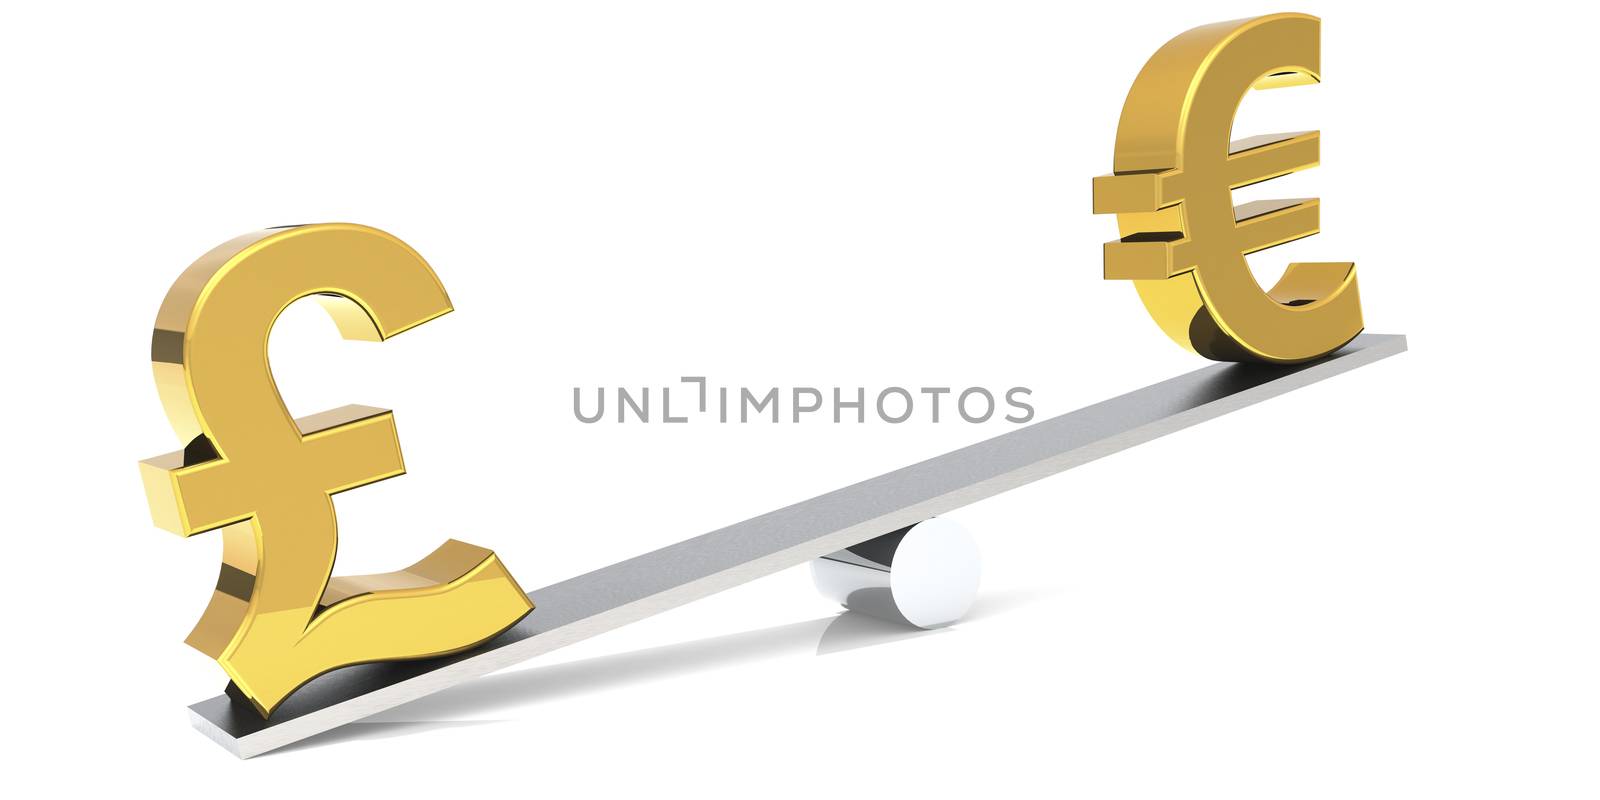 Pound and euro sign on the balance bar, 3D rendering